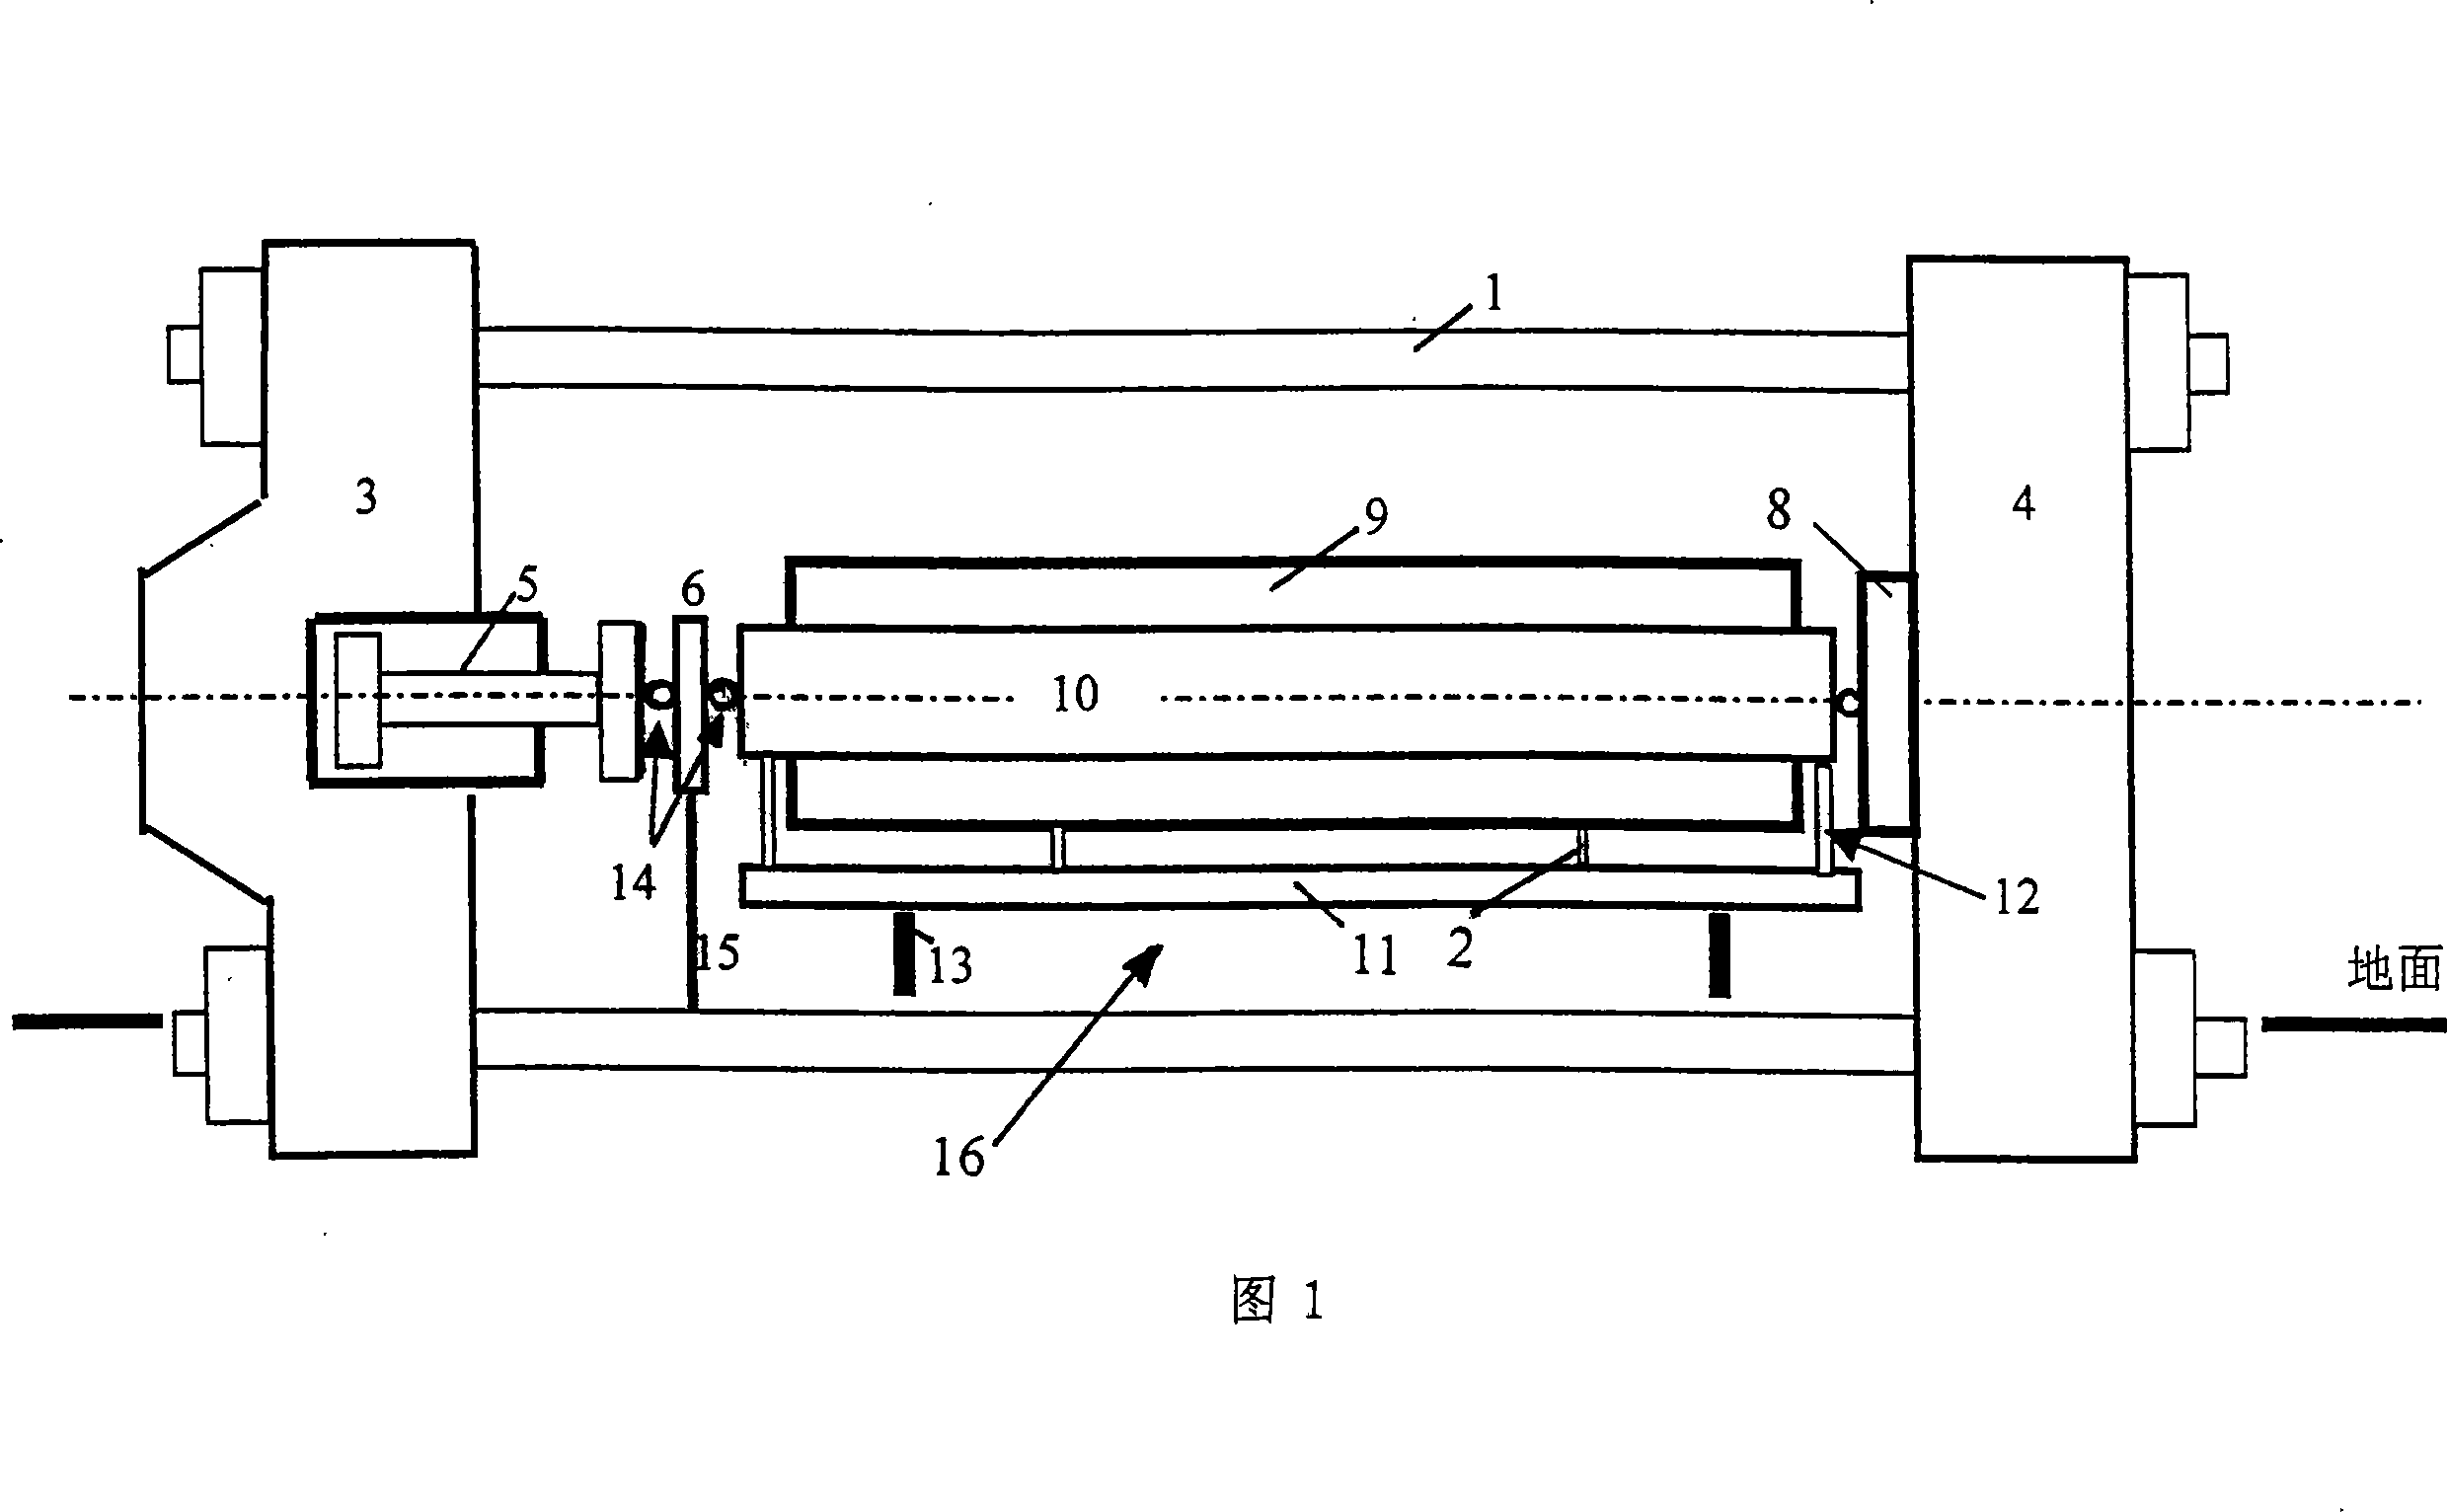 Member structure element temperature axis force measuring apparatus